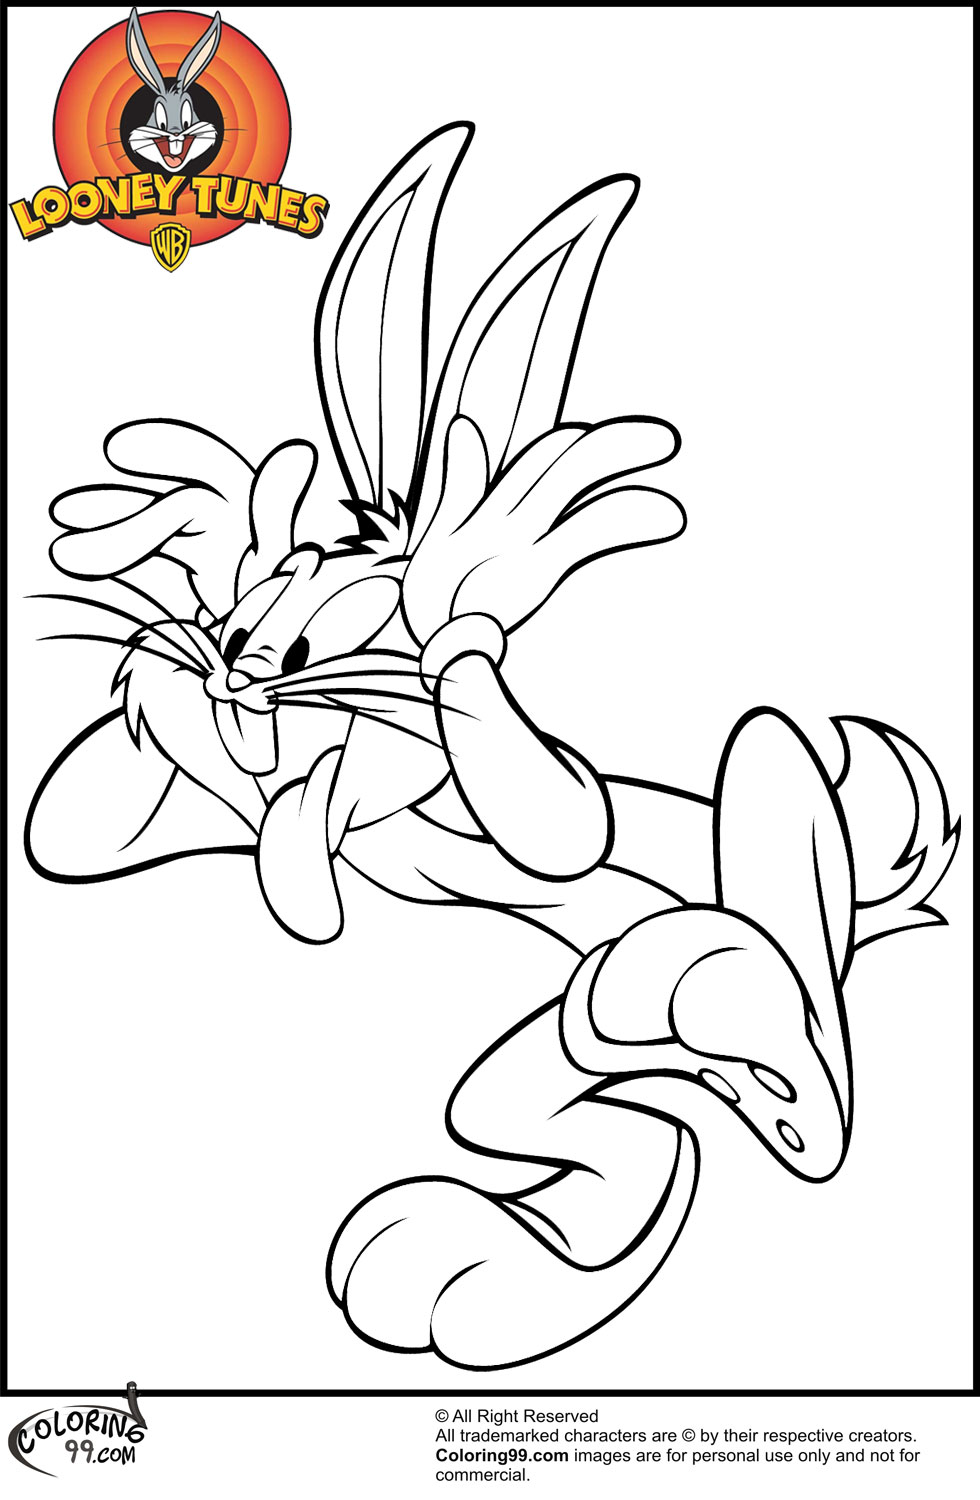 Bugs Bunny Coloring Pages | Team colors